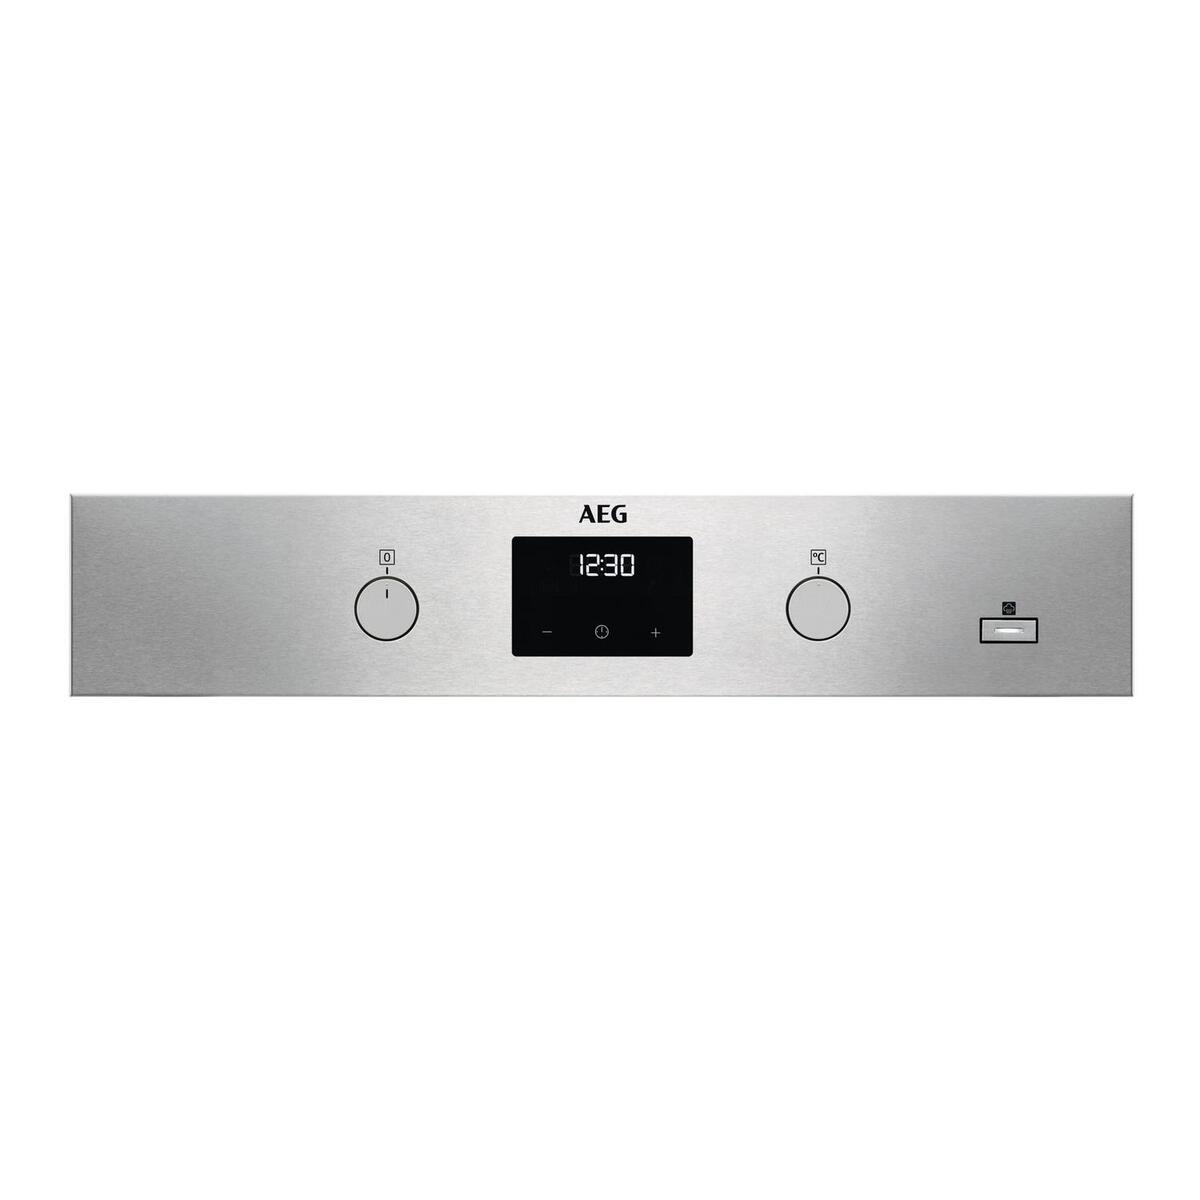 AEG BES35501EM 59cm 72L Built In Electric Single Oven, Stainless Steel